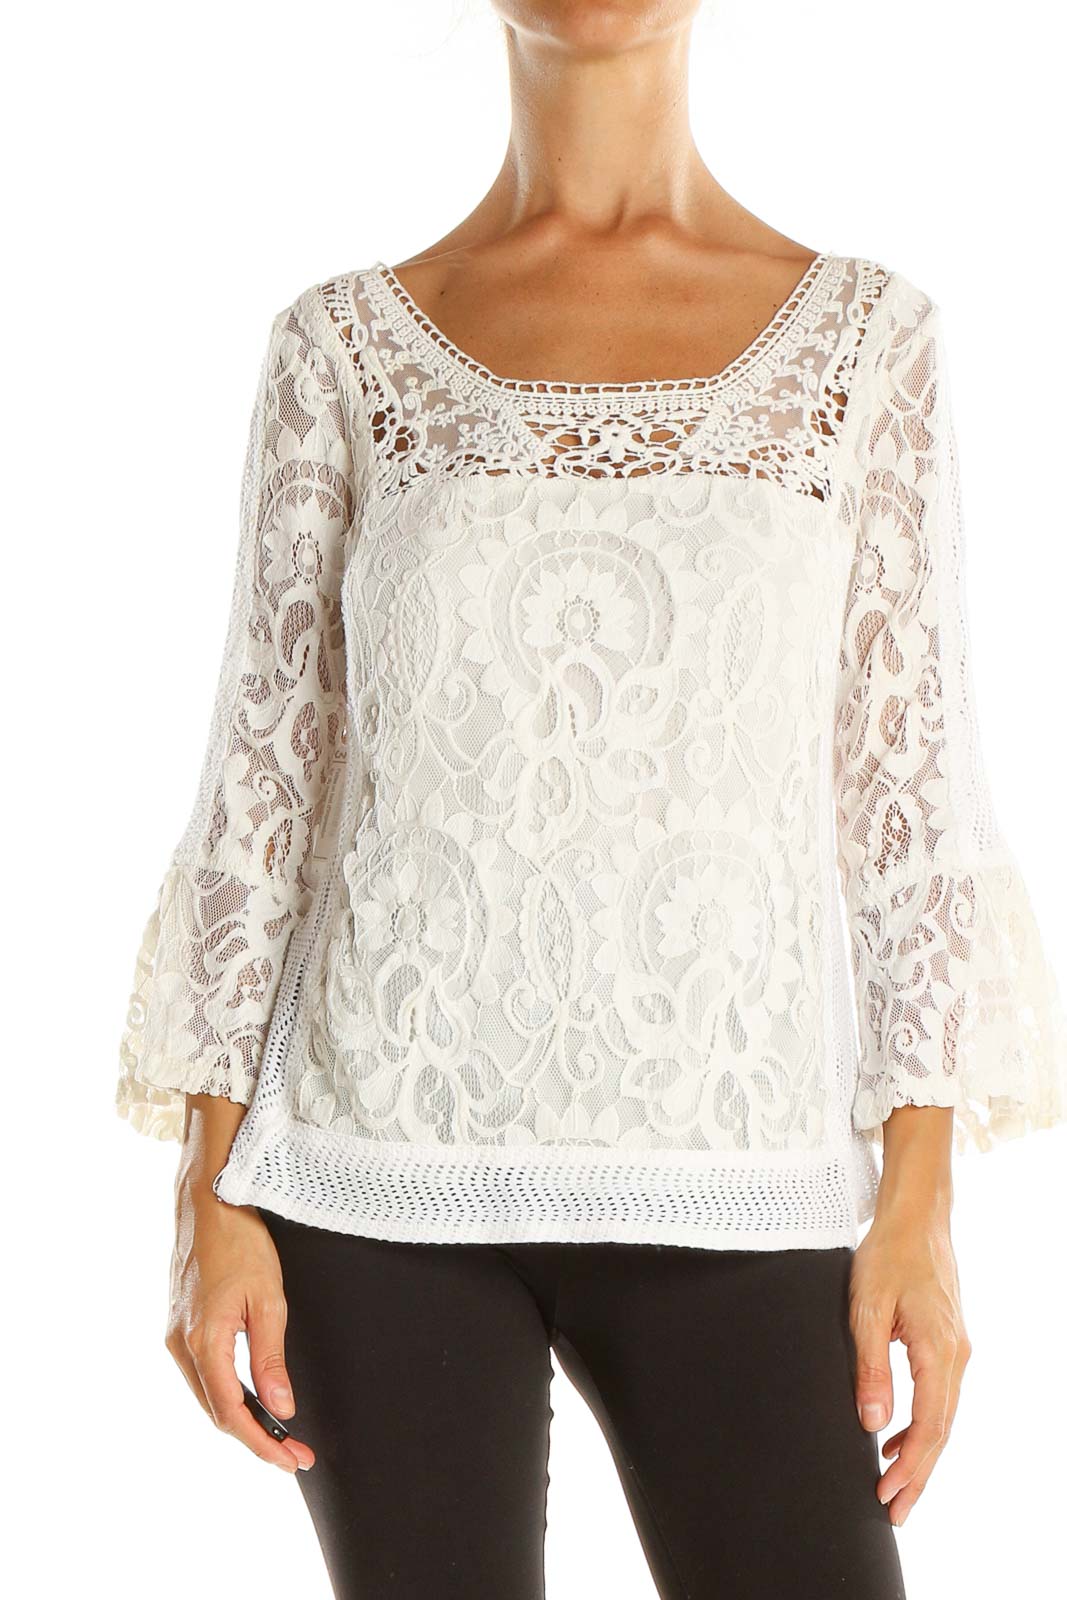 White Lace Chic Blouse Front